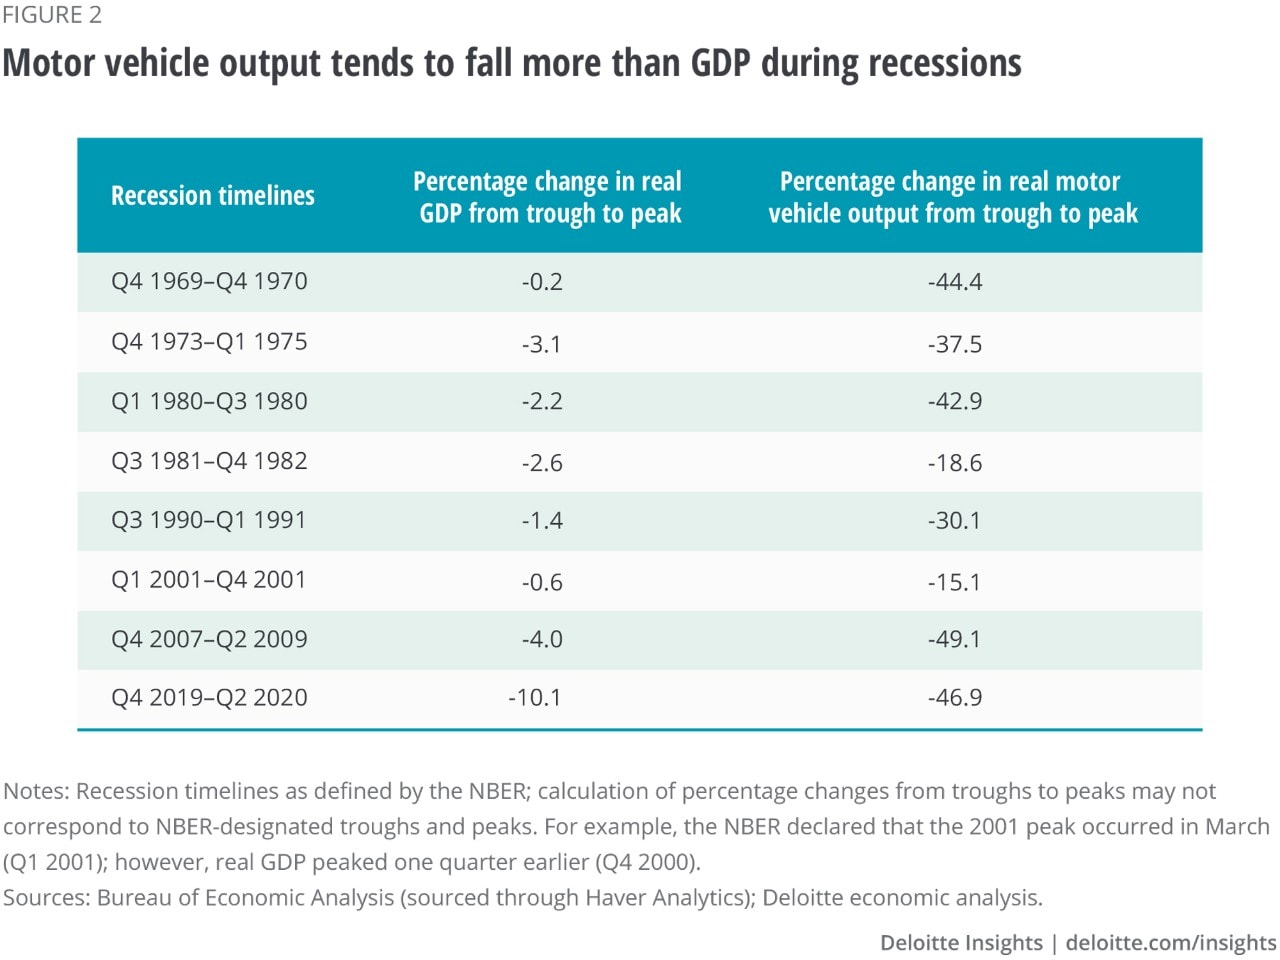 Figure 2. Motor vehicle output tends to fall more than GDP during recessions